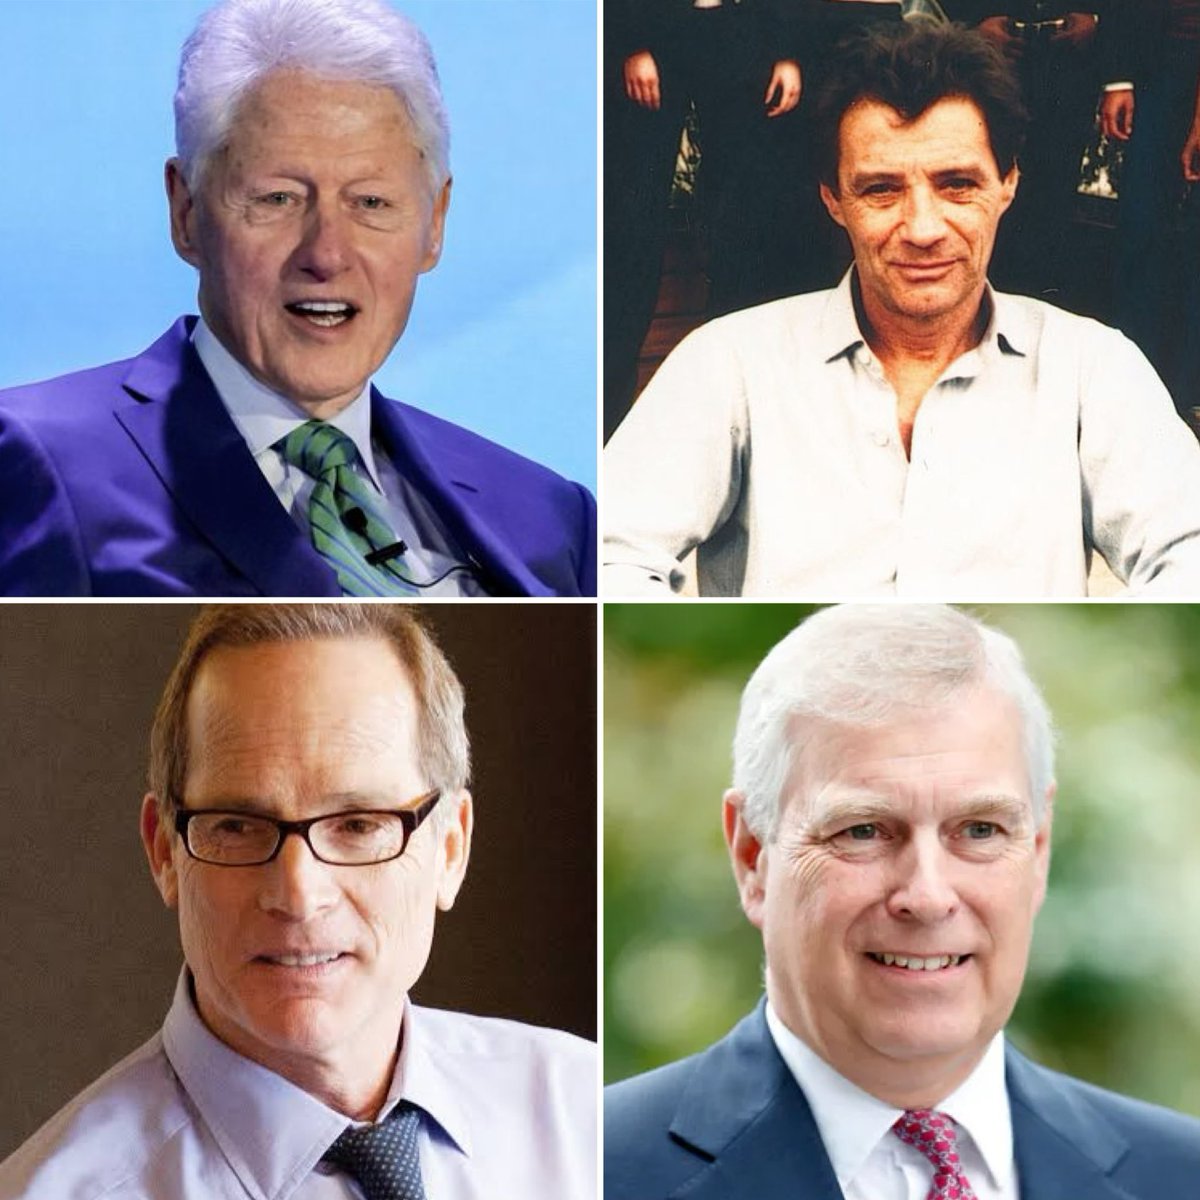 The names of more than 170 Jeffrey Epstein associates were just revealed in unsealed court documents.

Big names on the list includes former President Bill Clinton, his estranged longtime aide Doug Band, Prince Andrew, Glenn Dubin and the French modeling agent Jean-Luc Brunel.